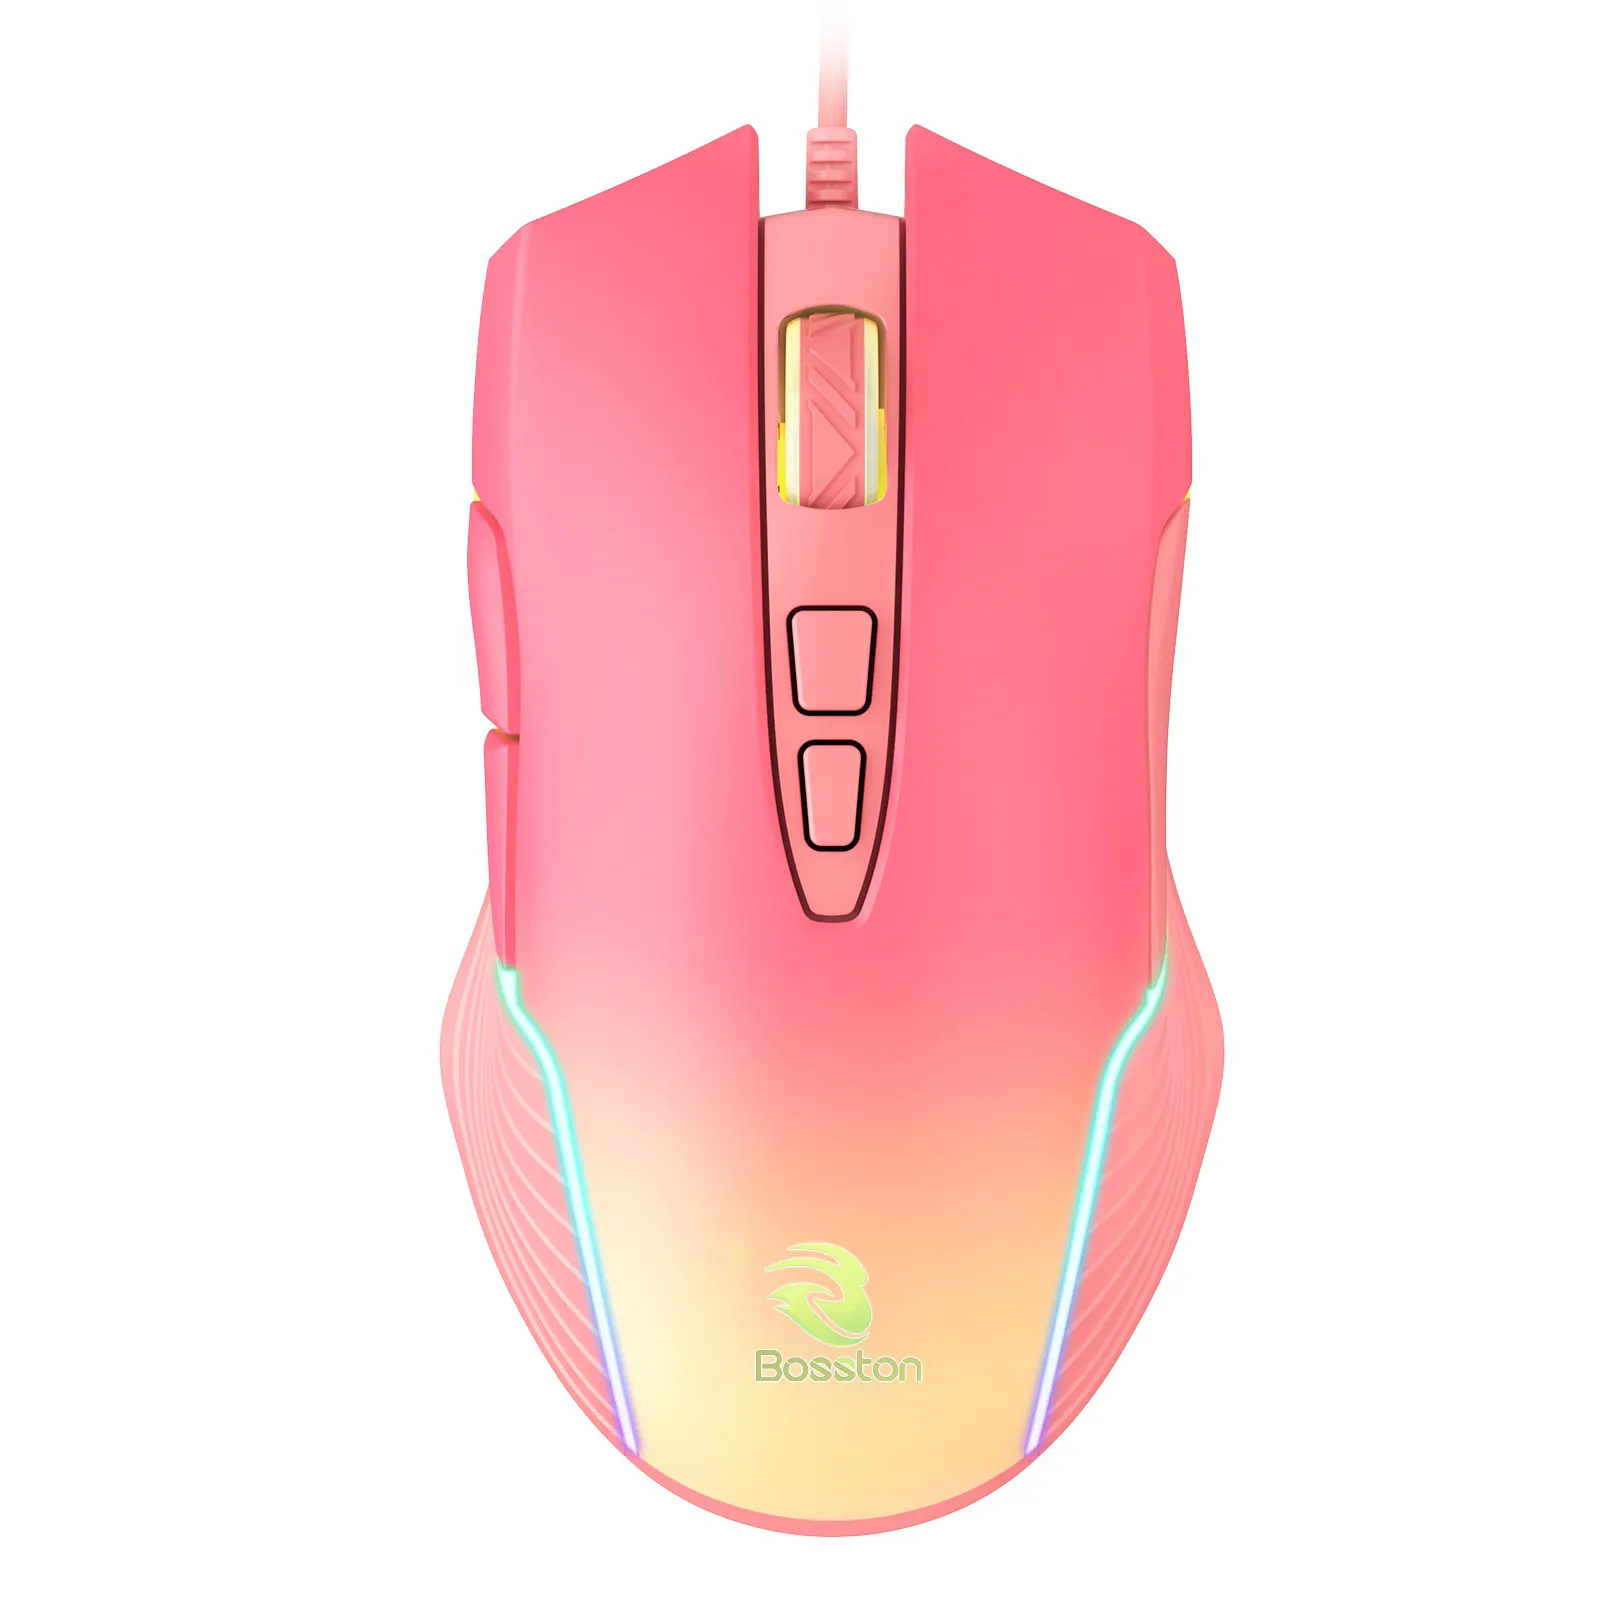 New arrival pink color RGB mouse laptop computer accessories 4800DPI 6D gaming mouse